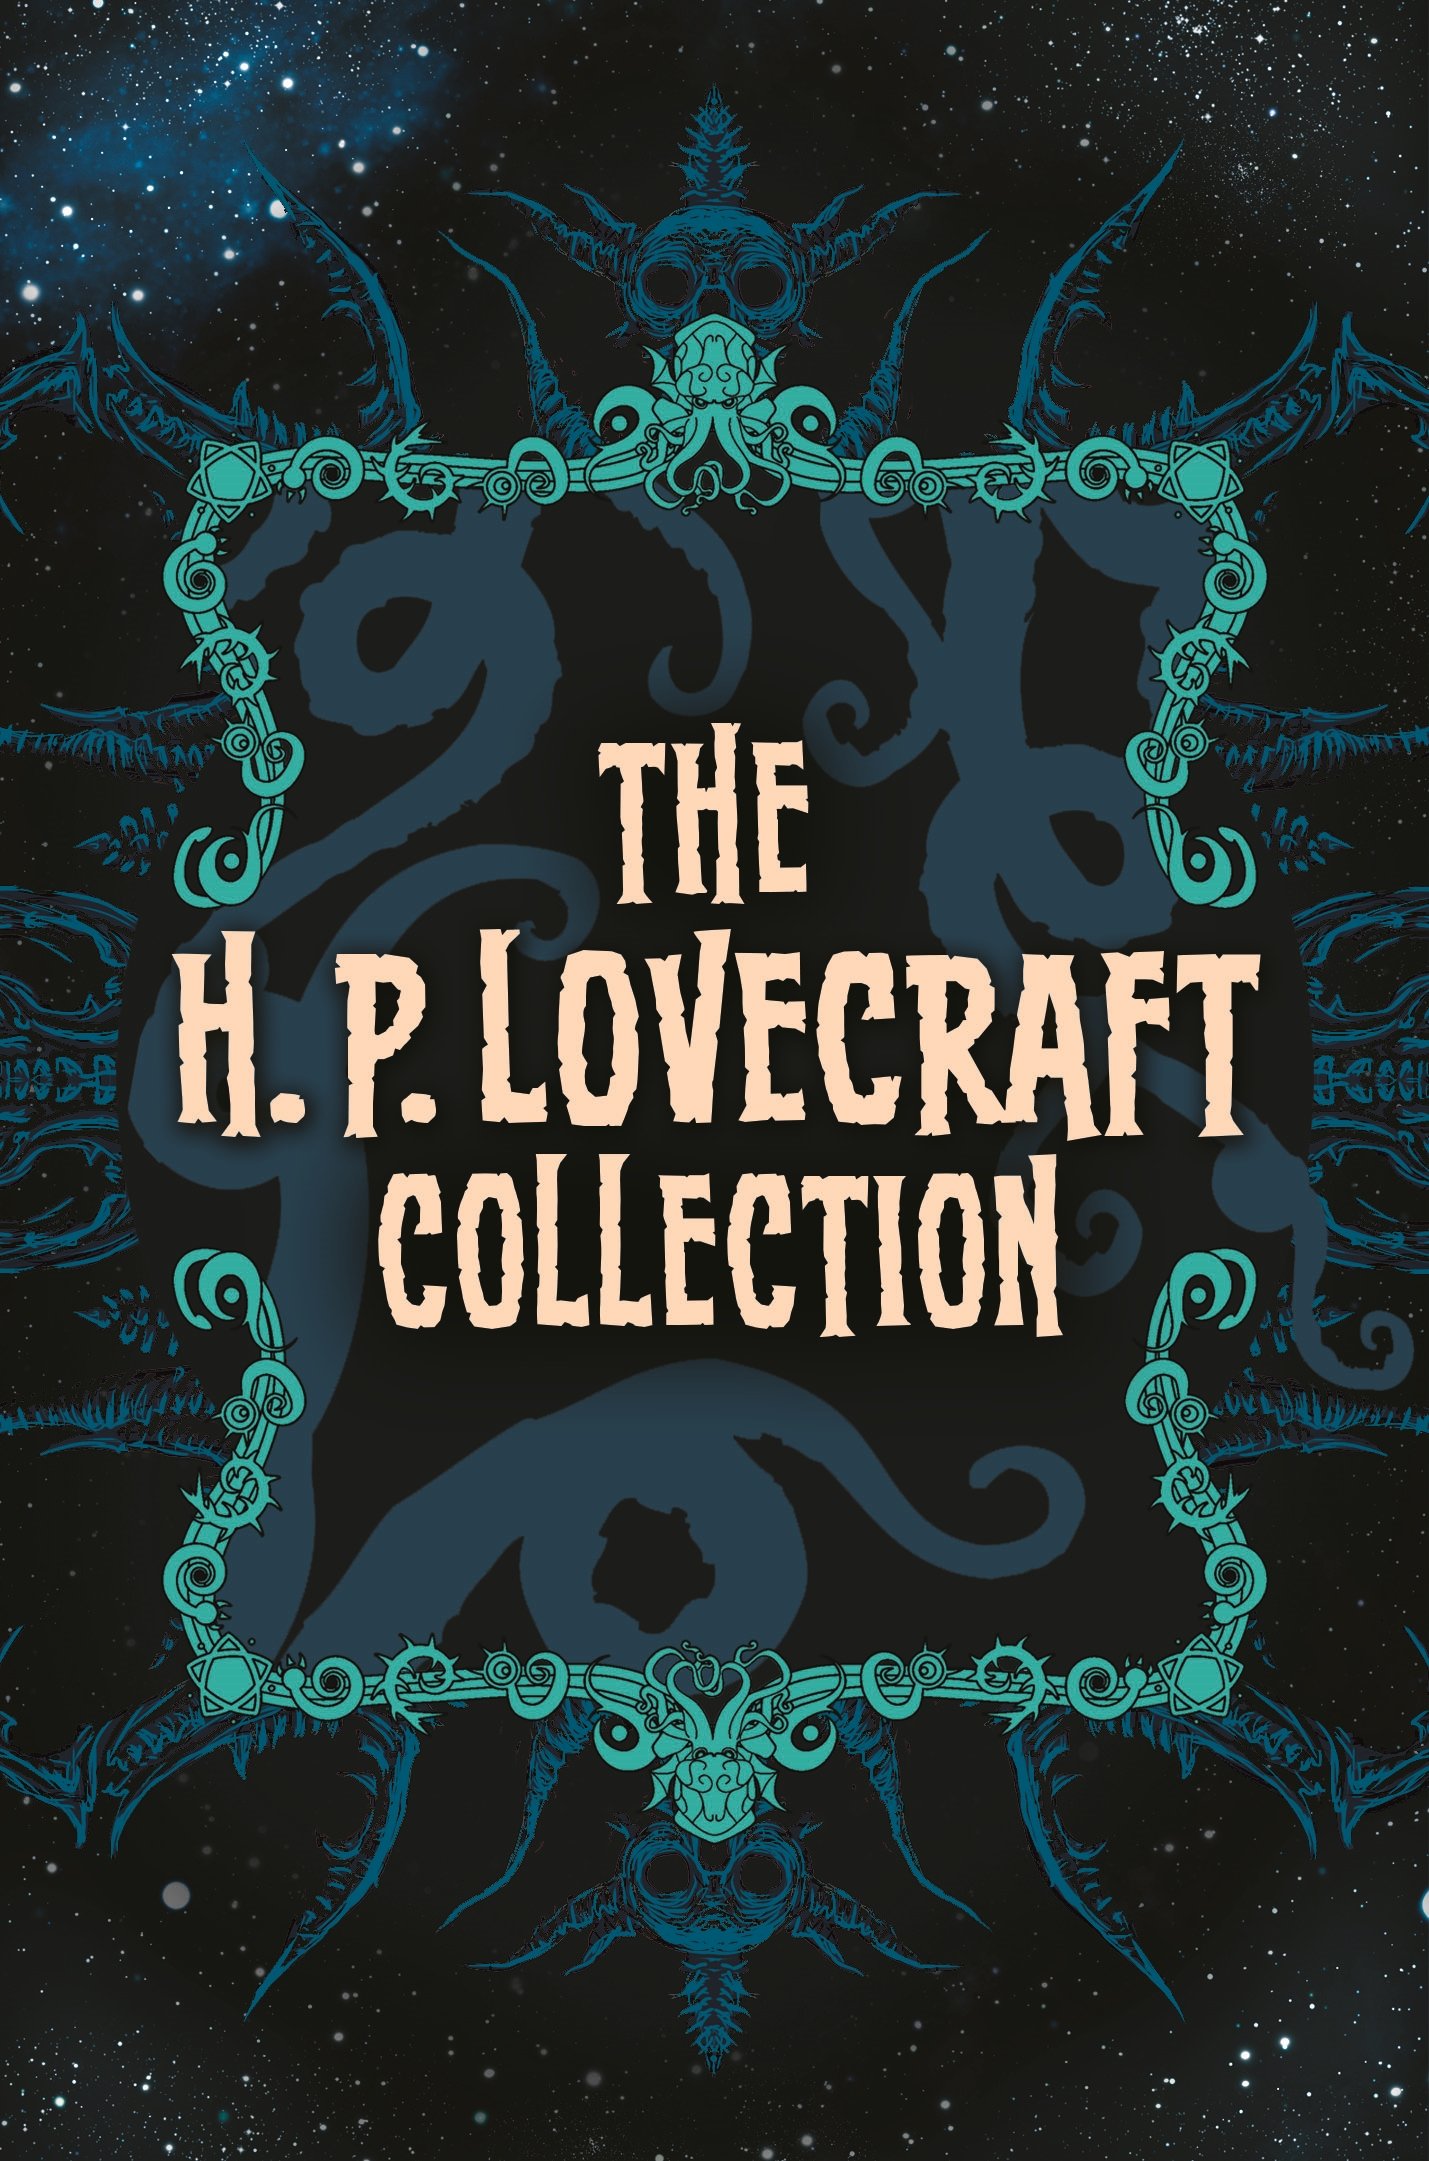 The H. P. Lovecraft Collection | H.P. Lovecraft